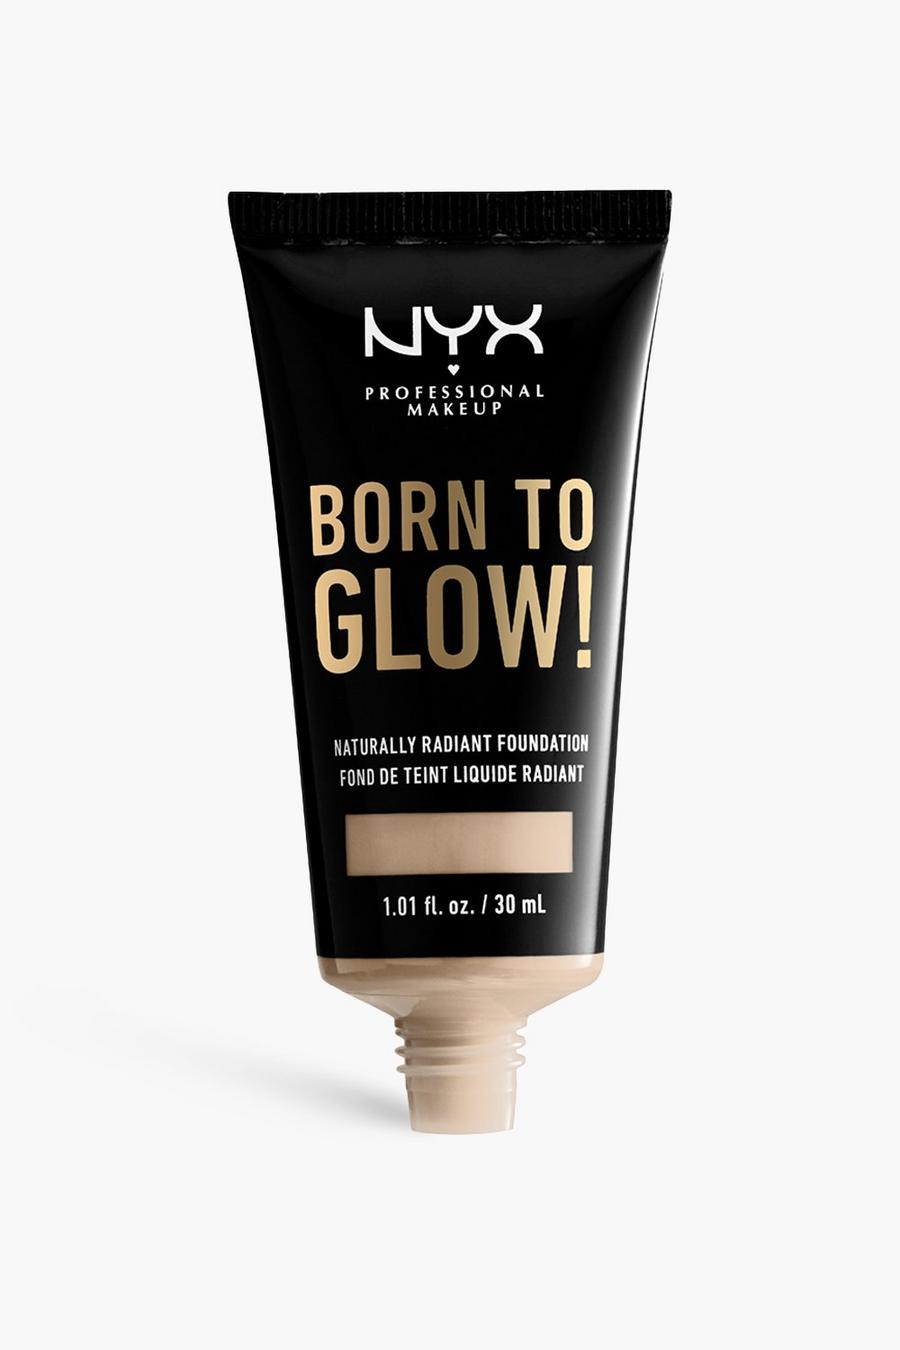 05 light SUITS & TAILORING Born To Glow! Naturally Radiant Foundation